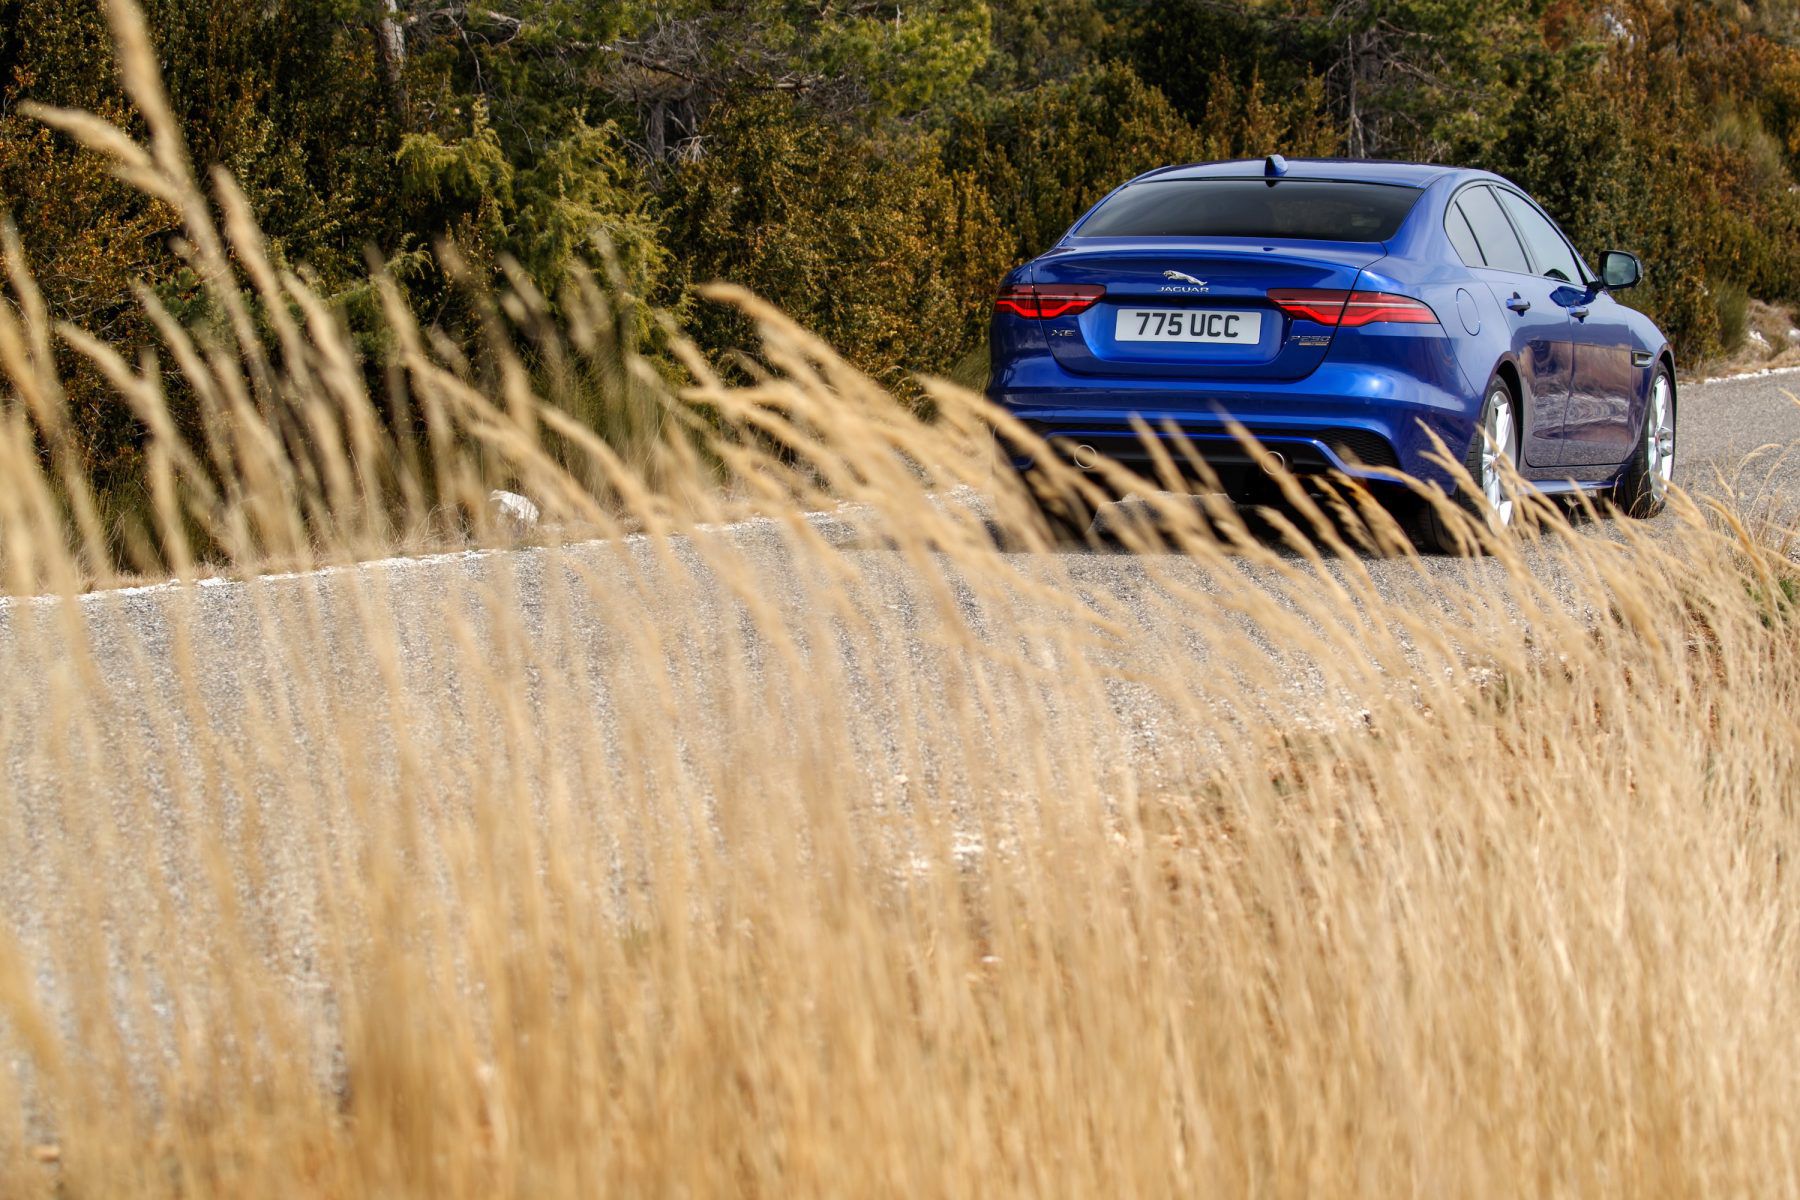 Blue Jaguar XE driving past a wheat blowing in the wind